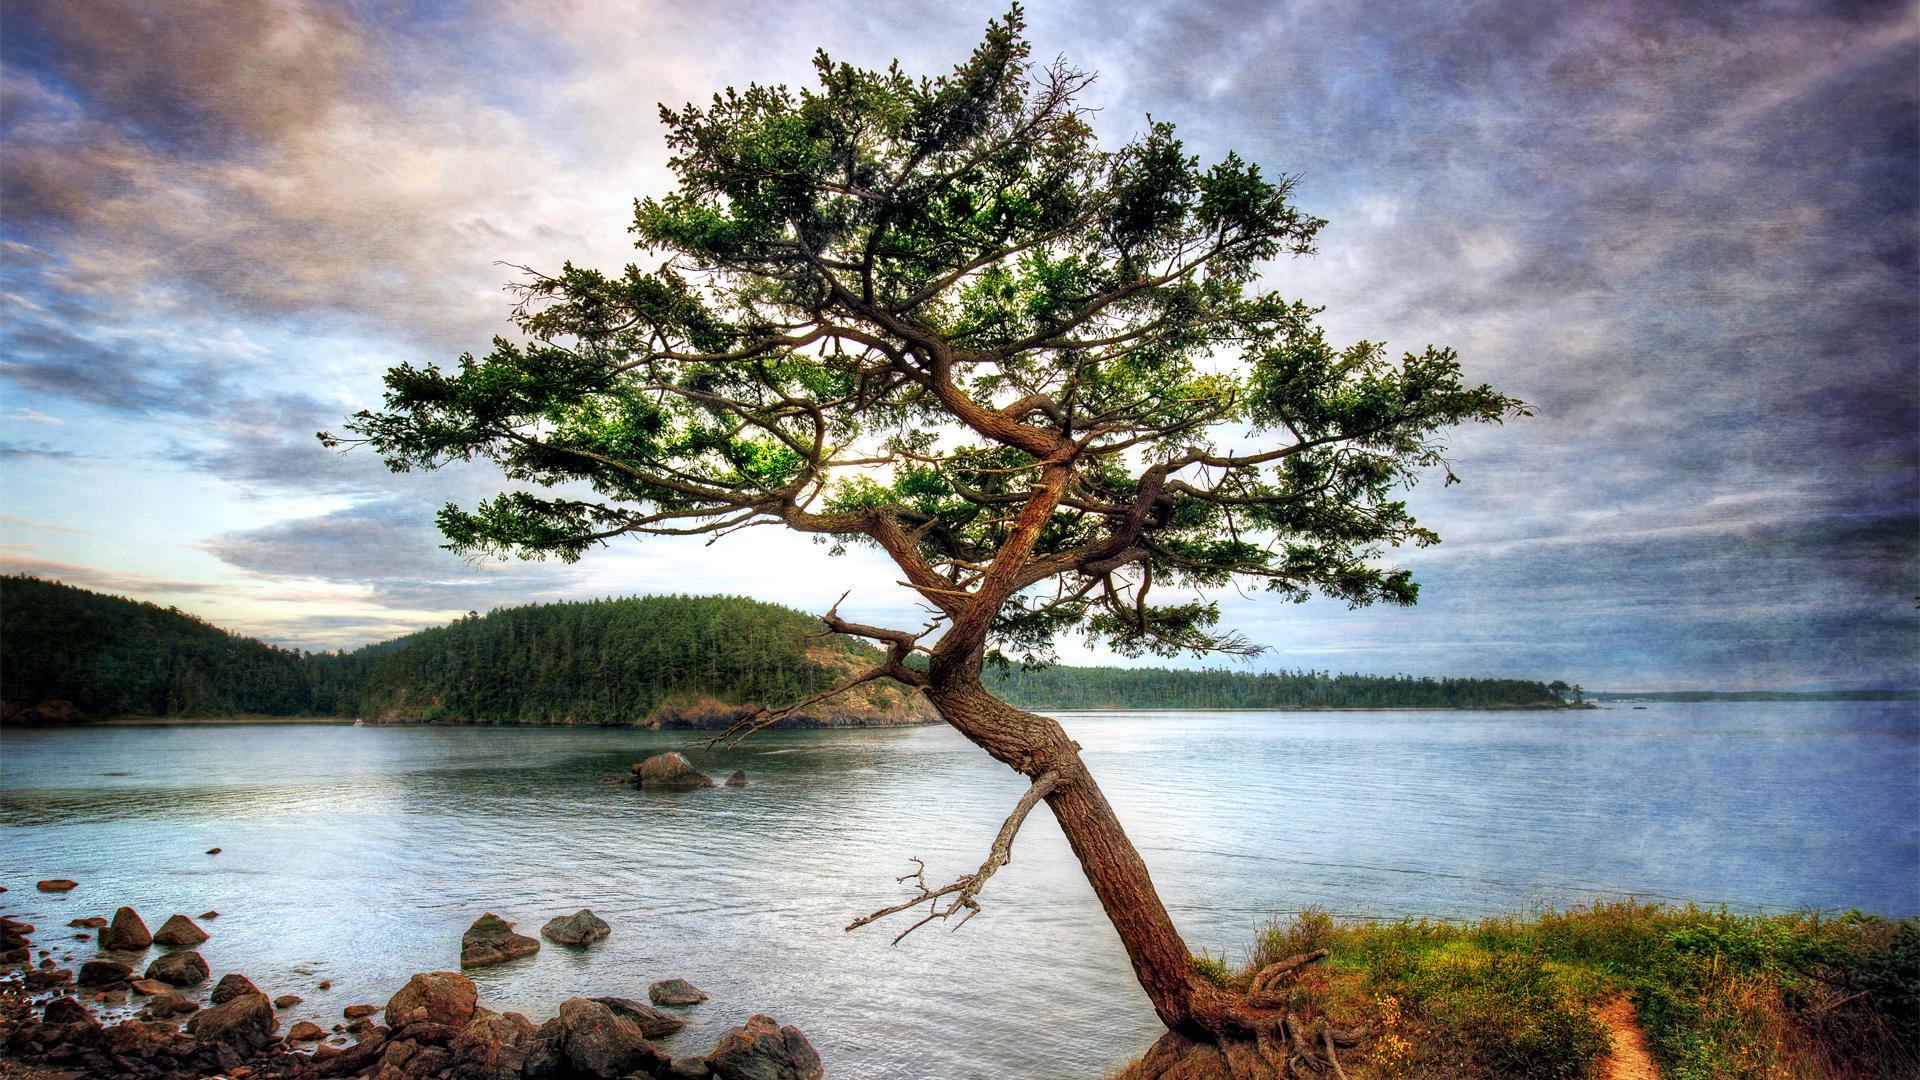 Beautiful tree on a bay shore hdr - (#151540) - High Quality and ...